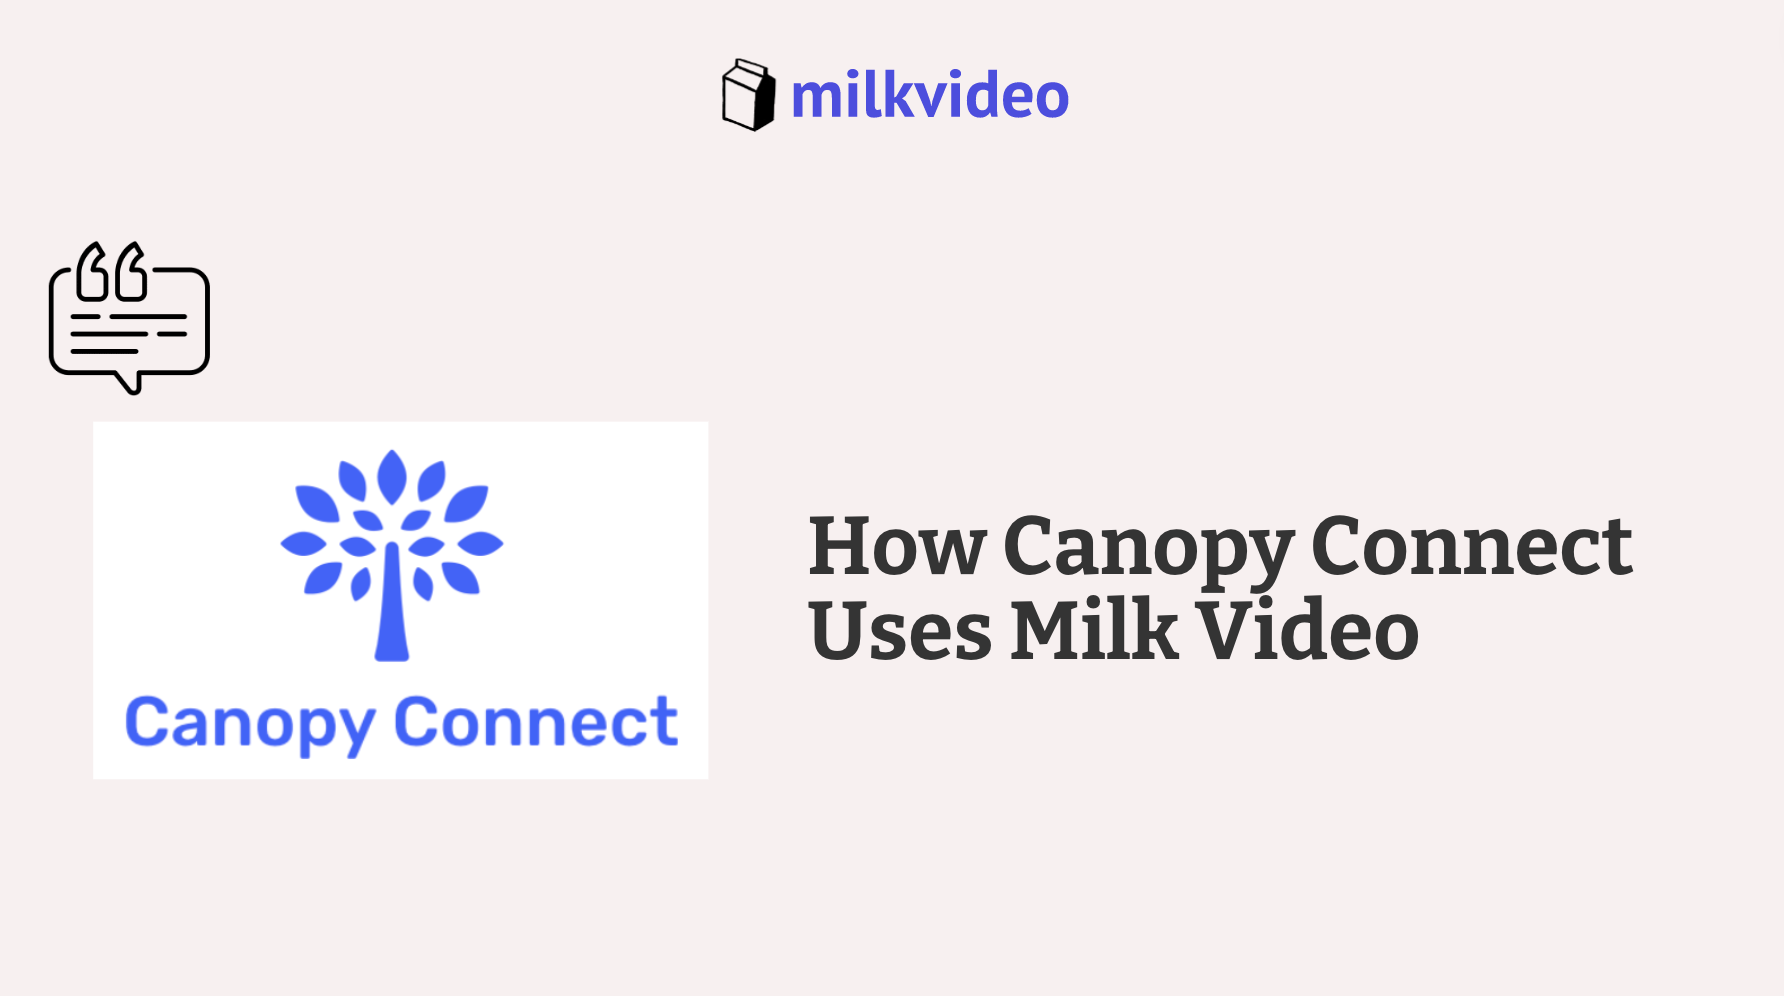 How Canopy Connect Uses Milk Video